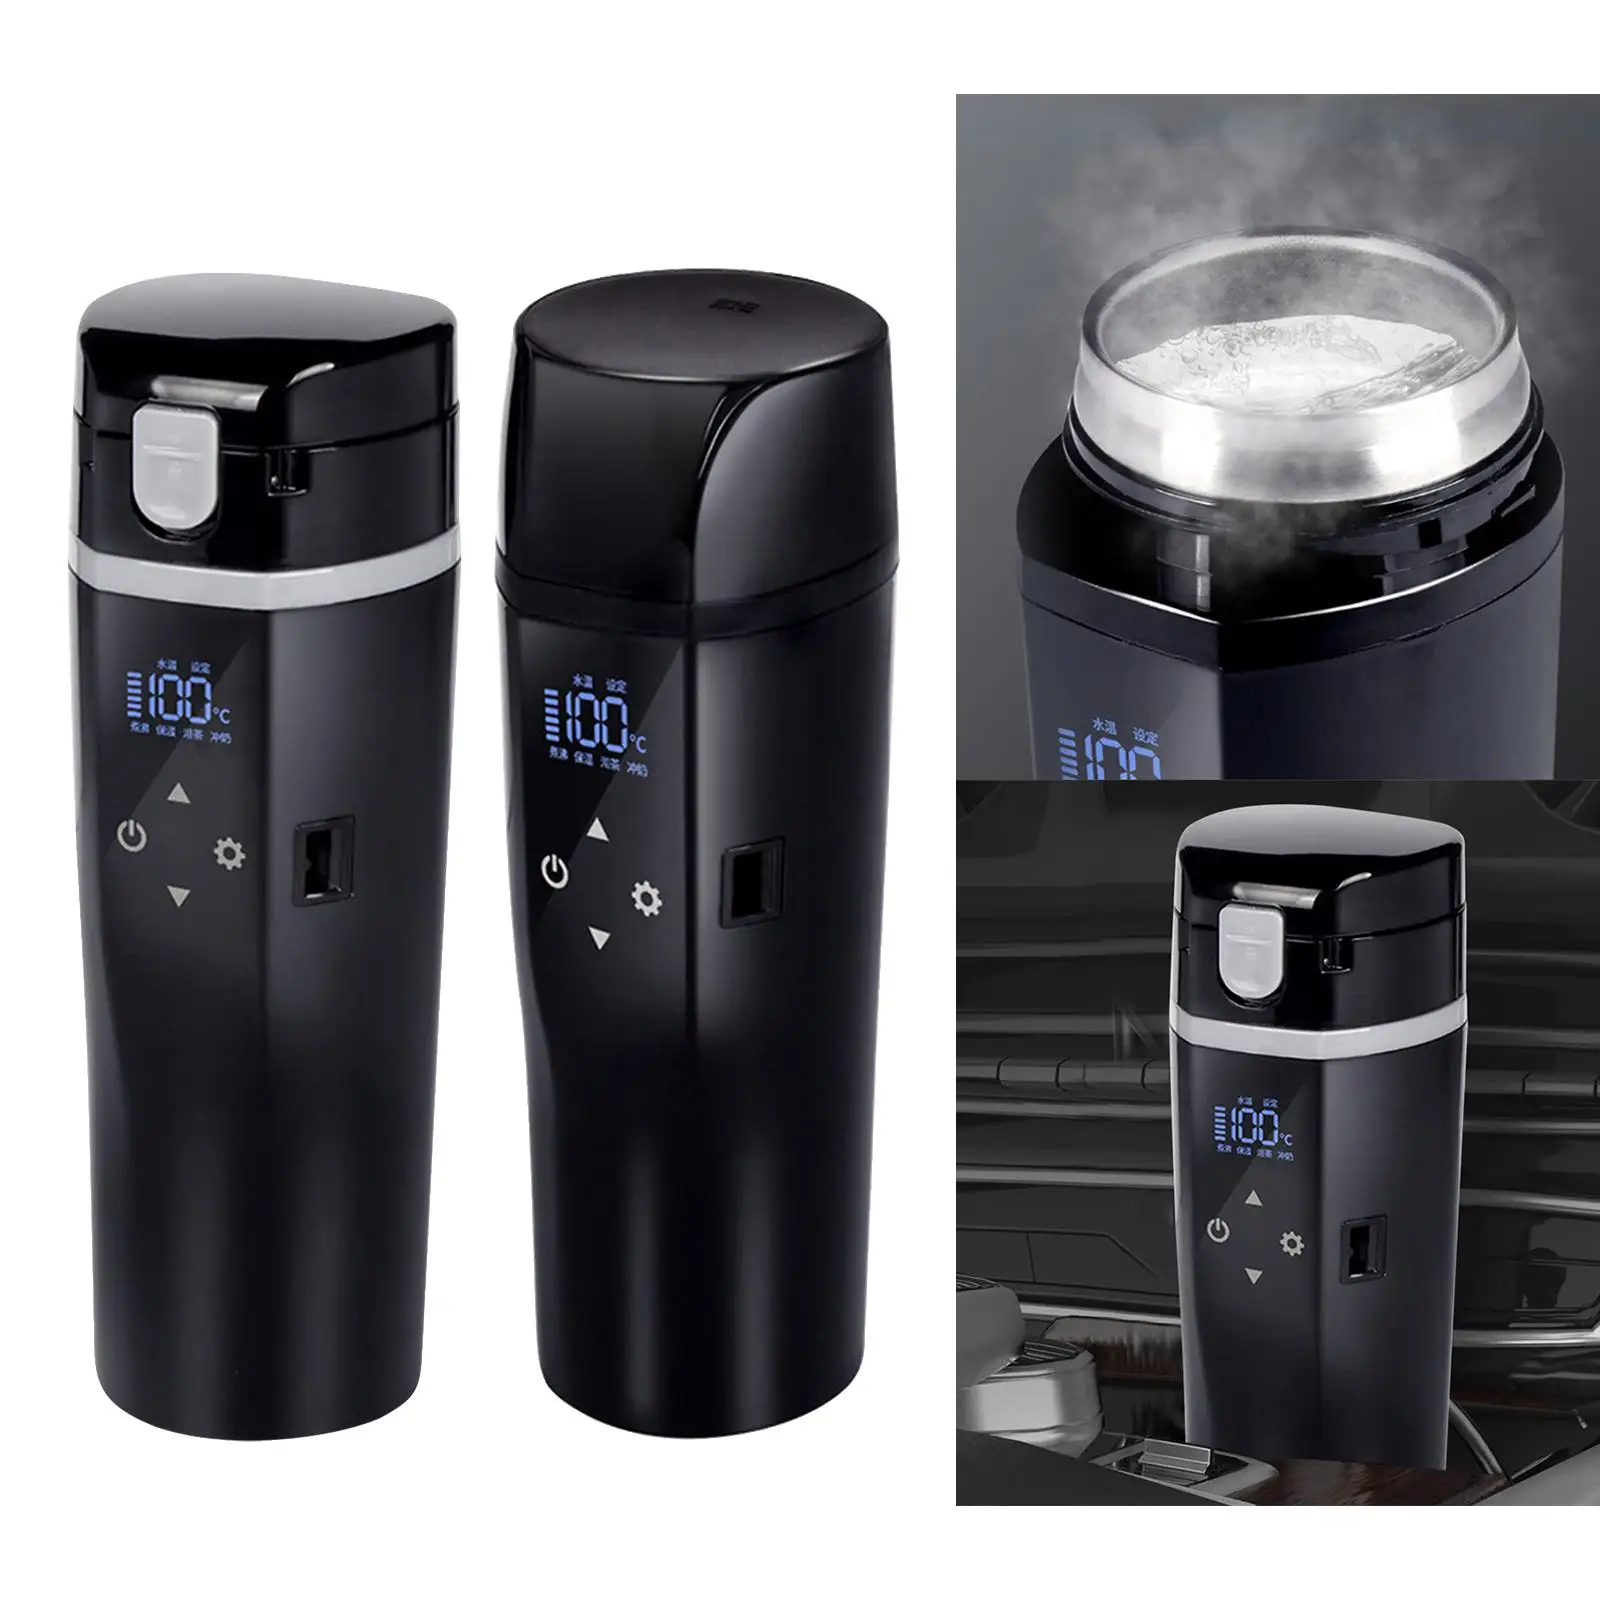 Car Kettle Heating 12V/24V Digital Display Touch Control 450ml Fits for Travel Auto Shut Off Tea Coffee Cigarette Lighter